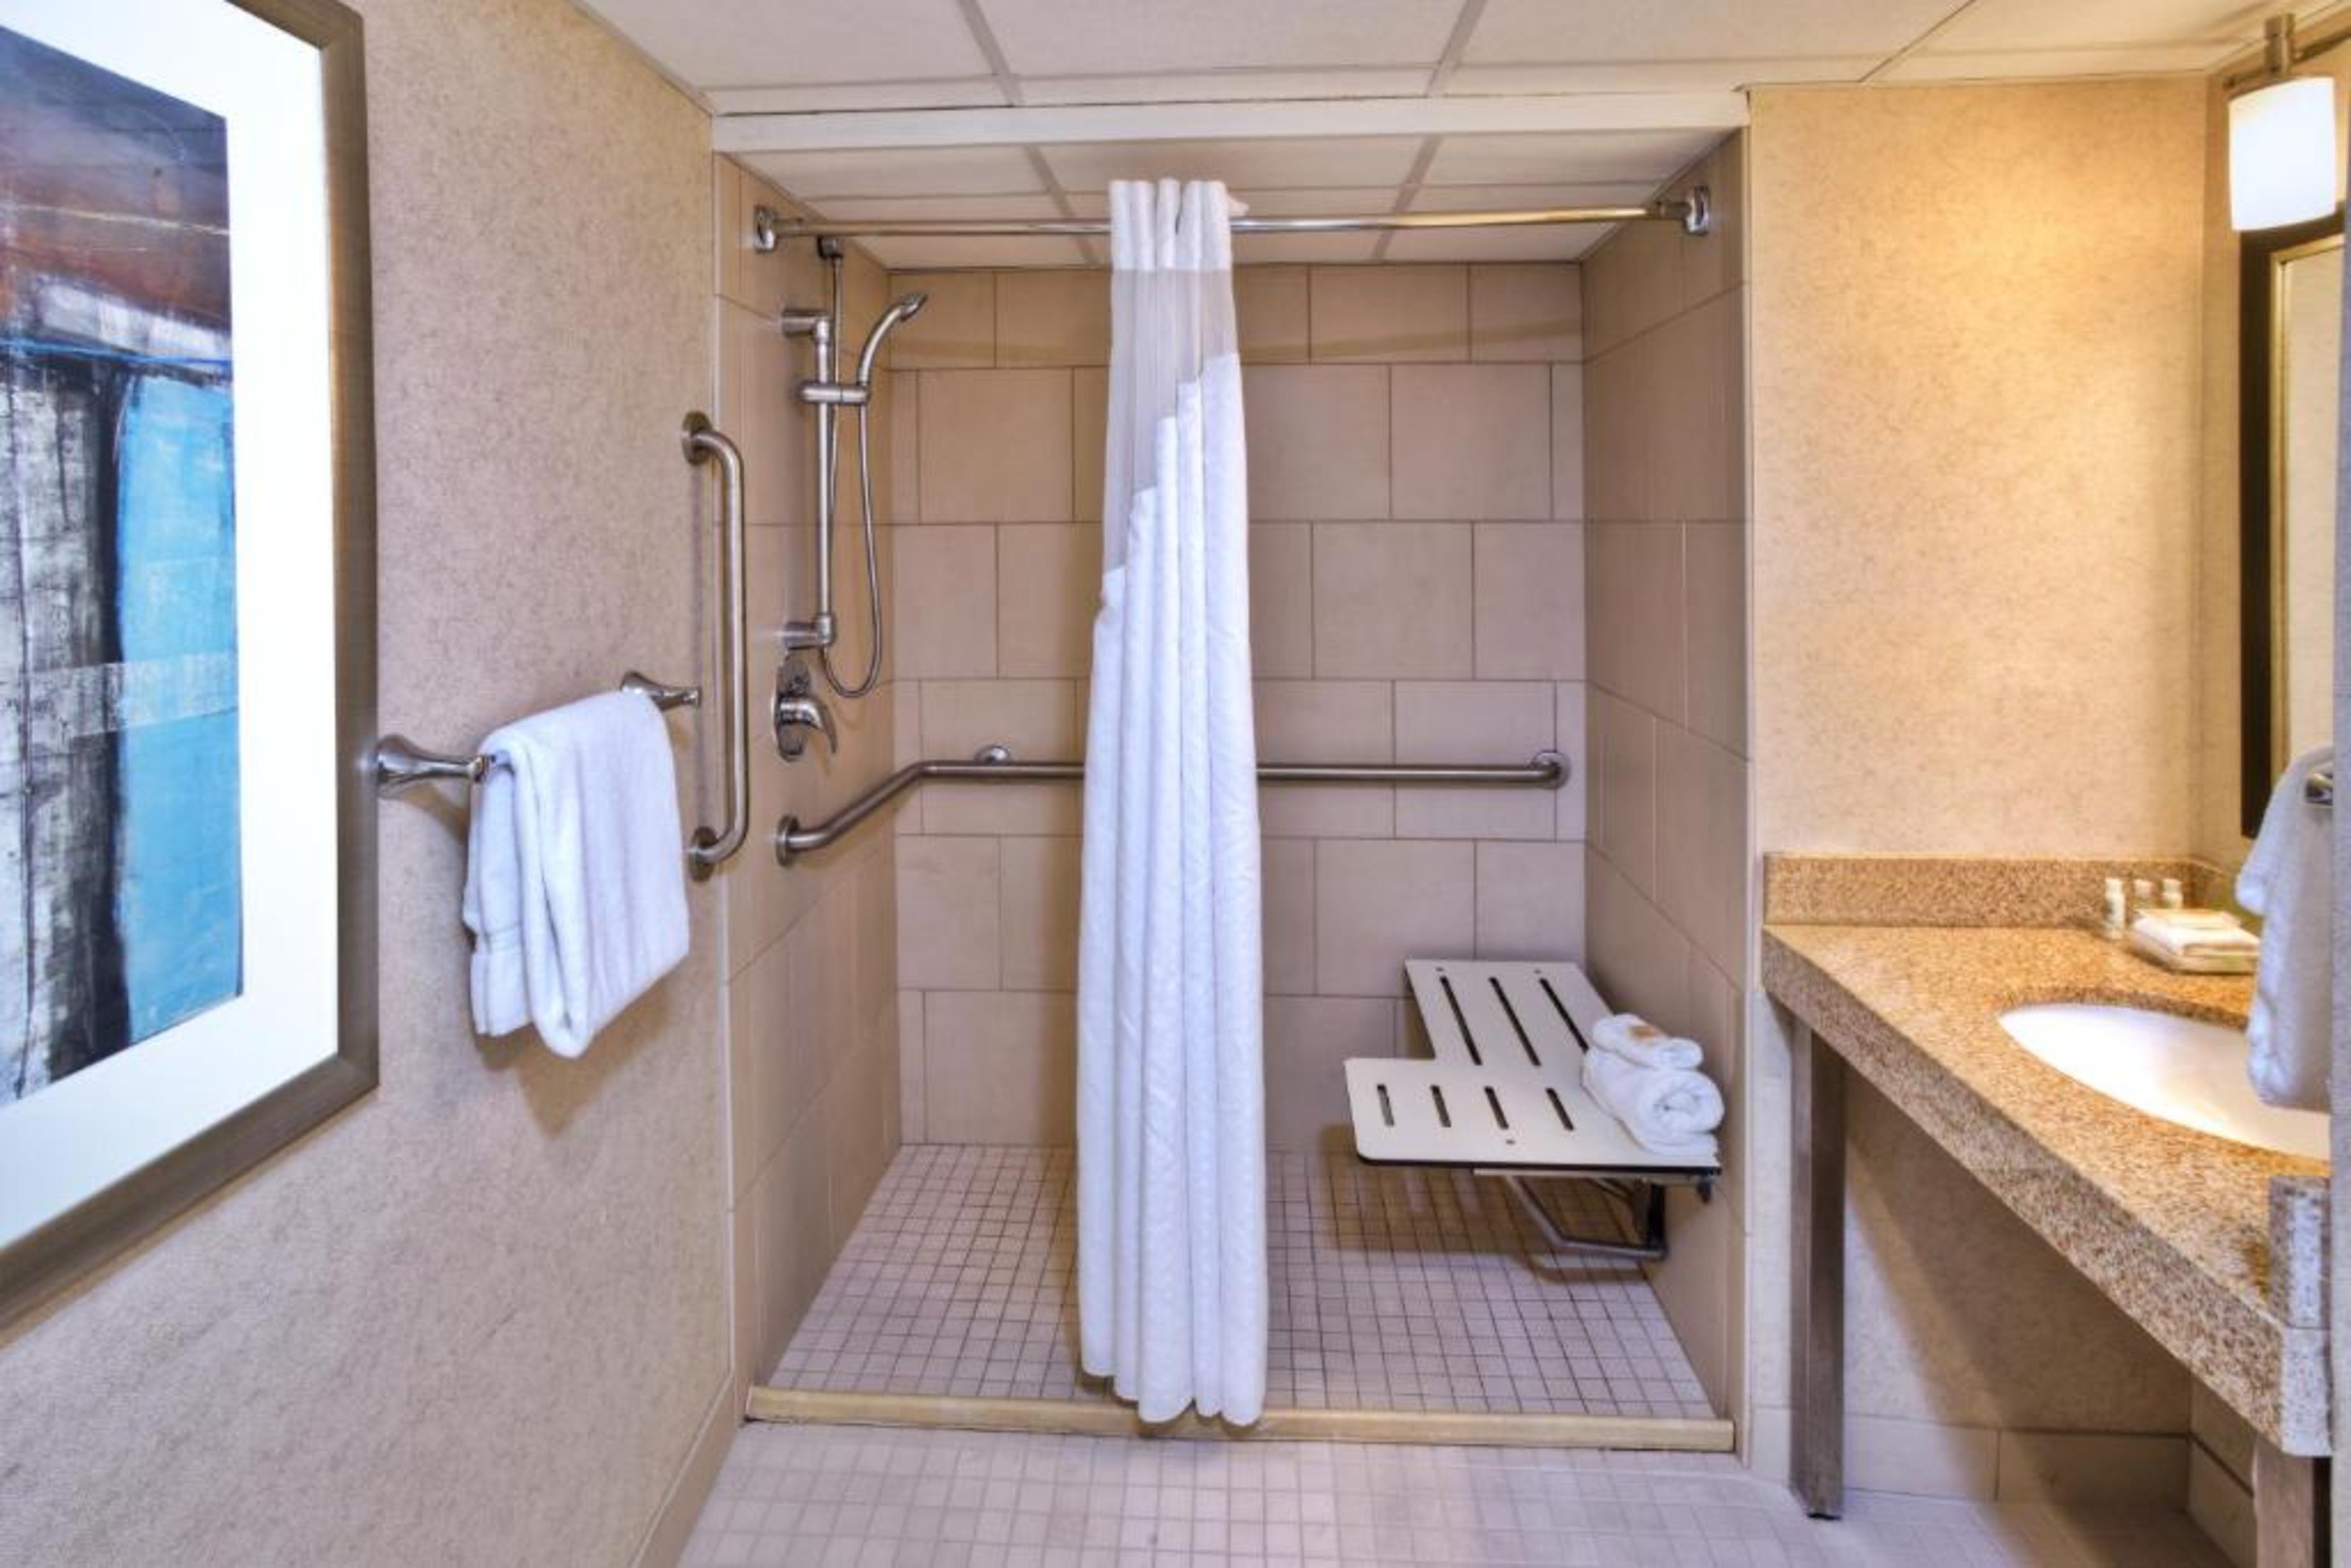 Accessible compliant bathroom with grab bars & roll in shower.